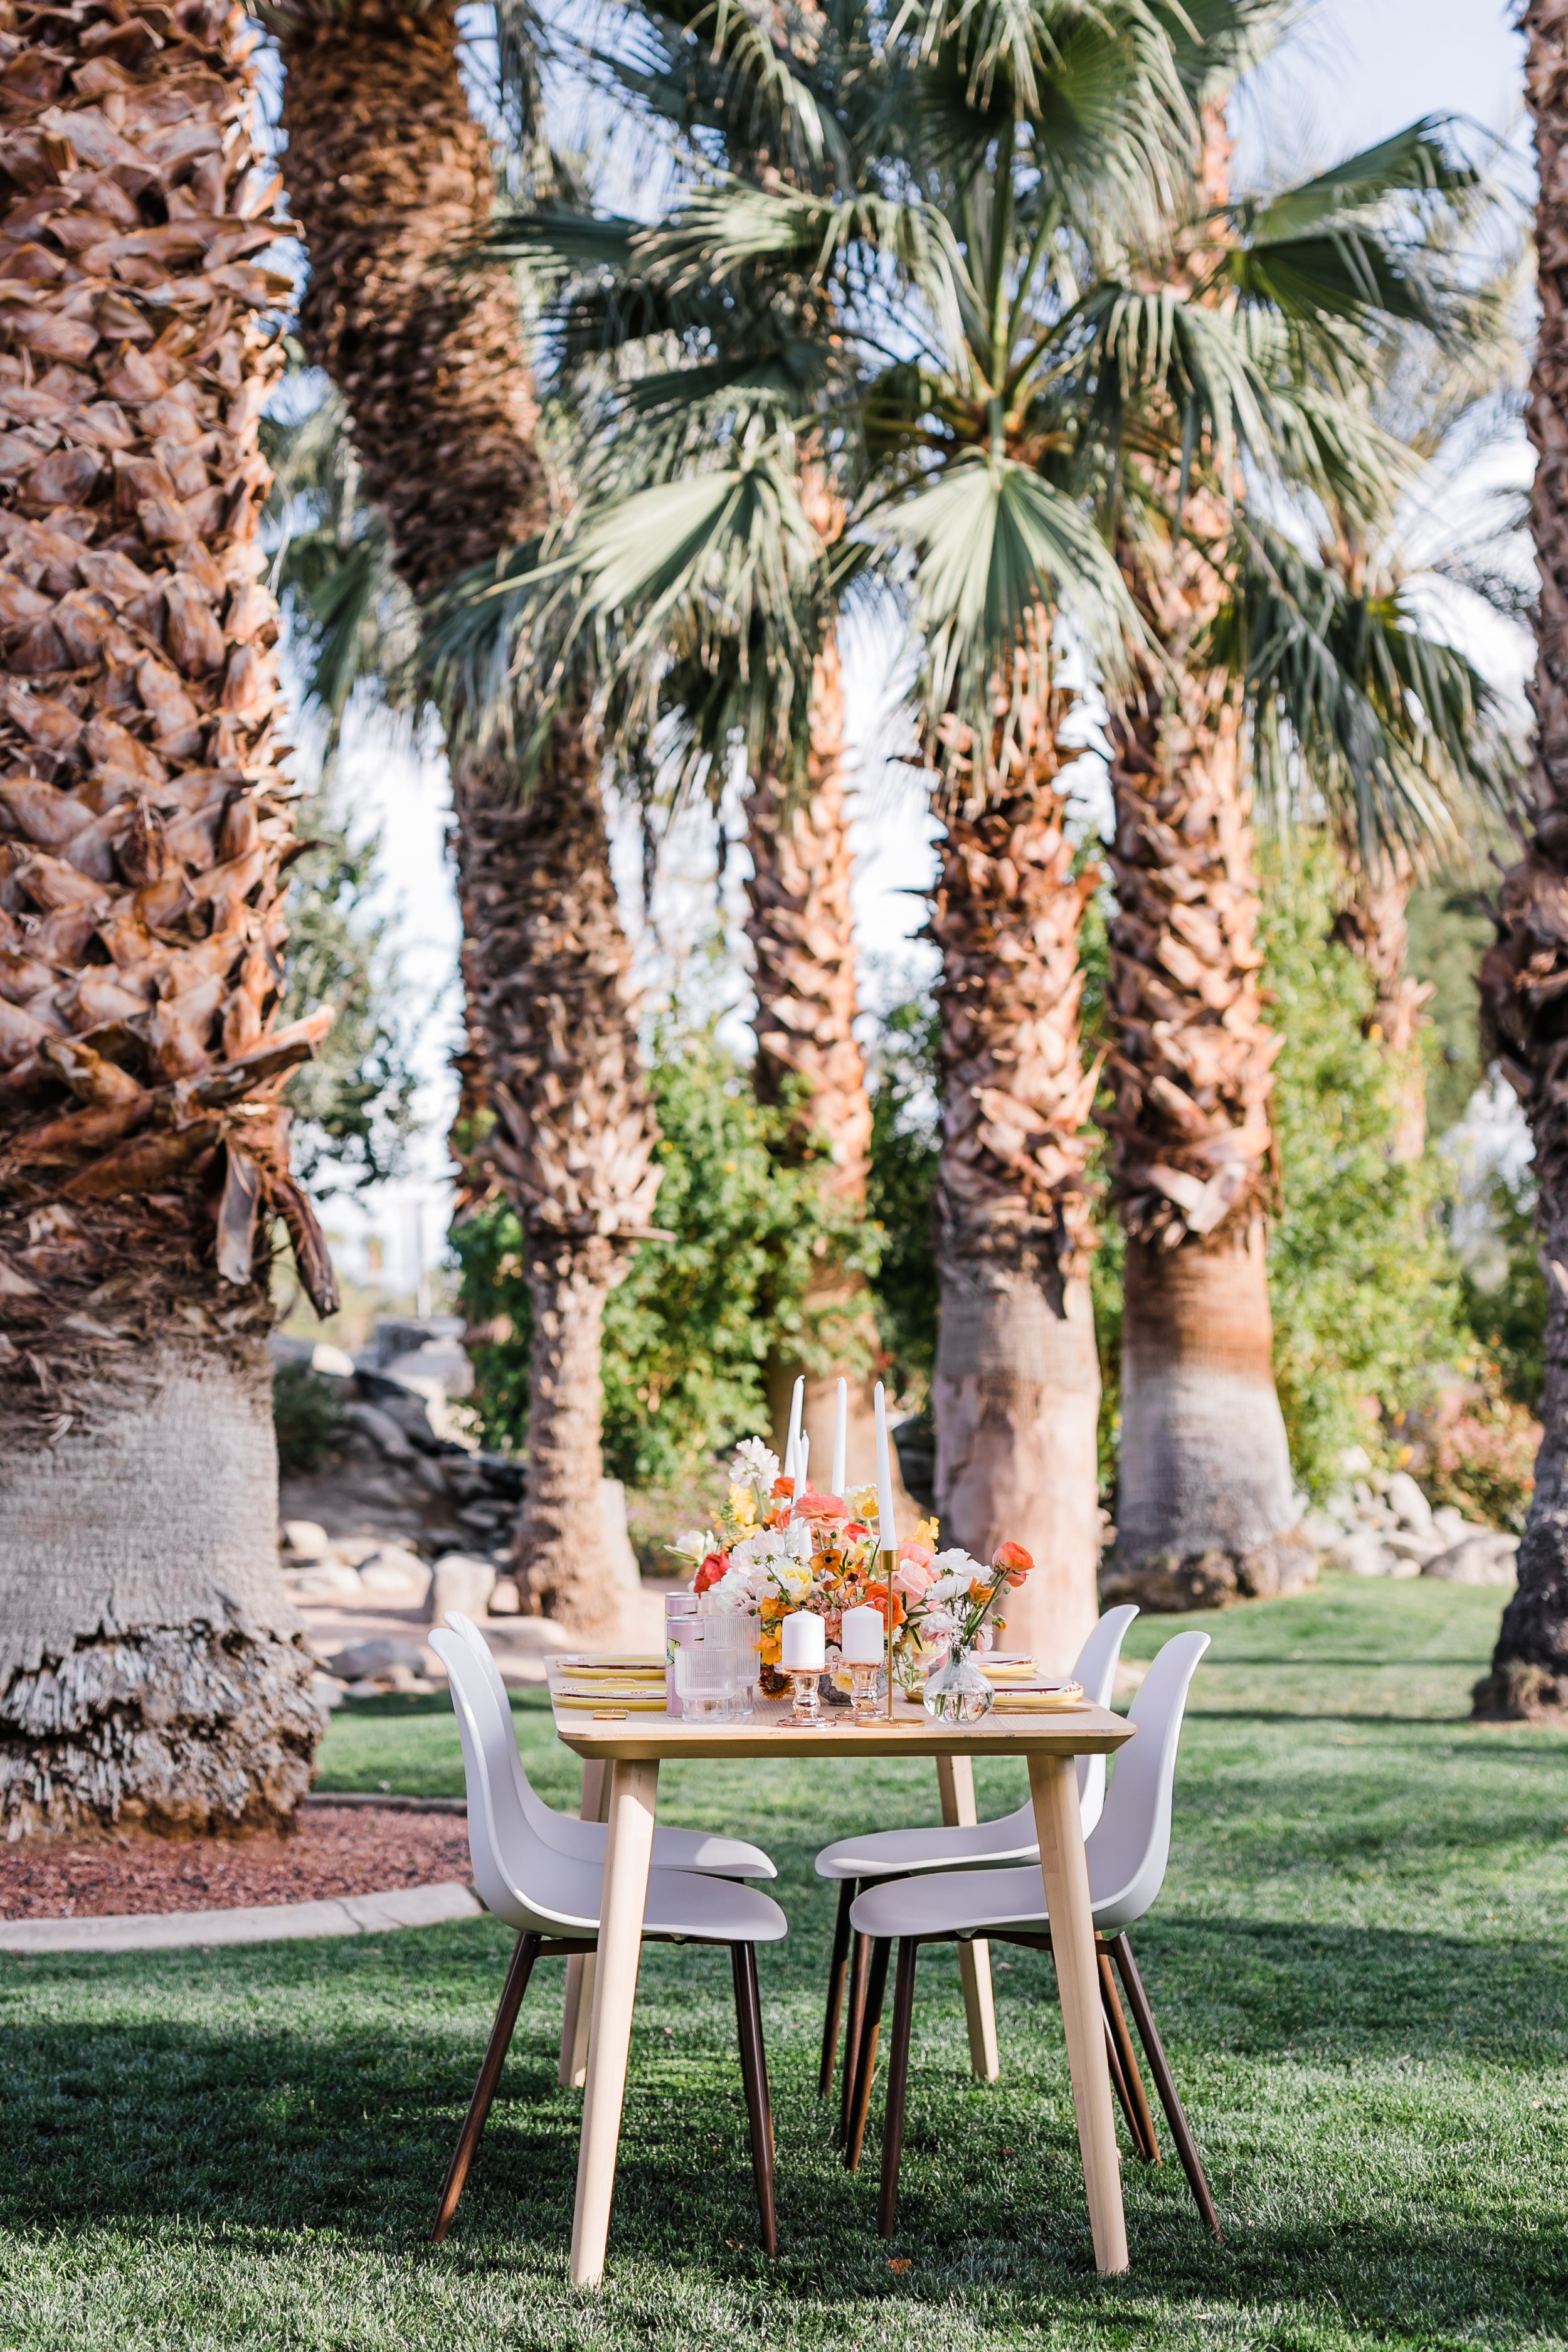 Bright sunny reception flowers and wedding decor at Palm Springs wedding elopement at Bougainvillea Estate.